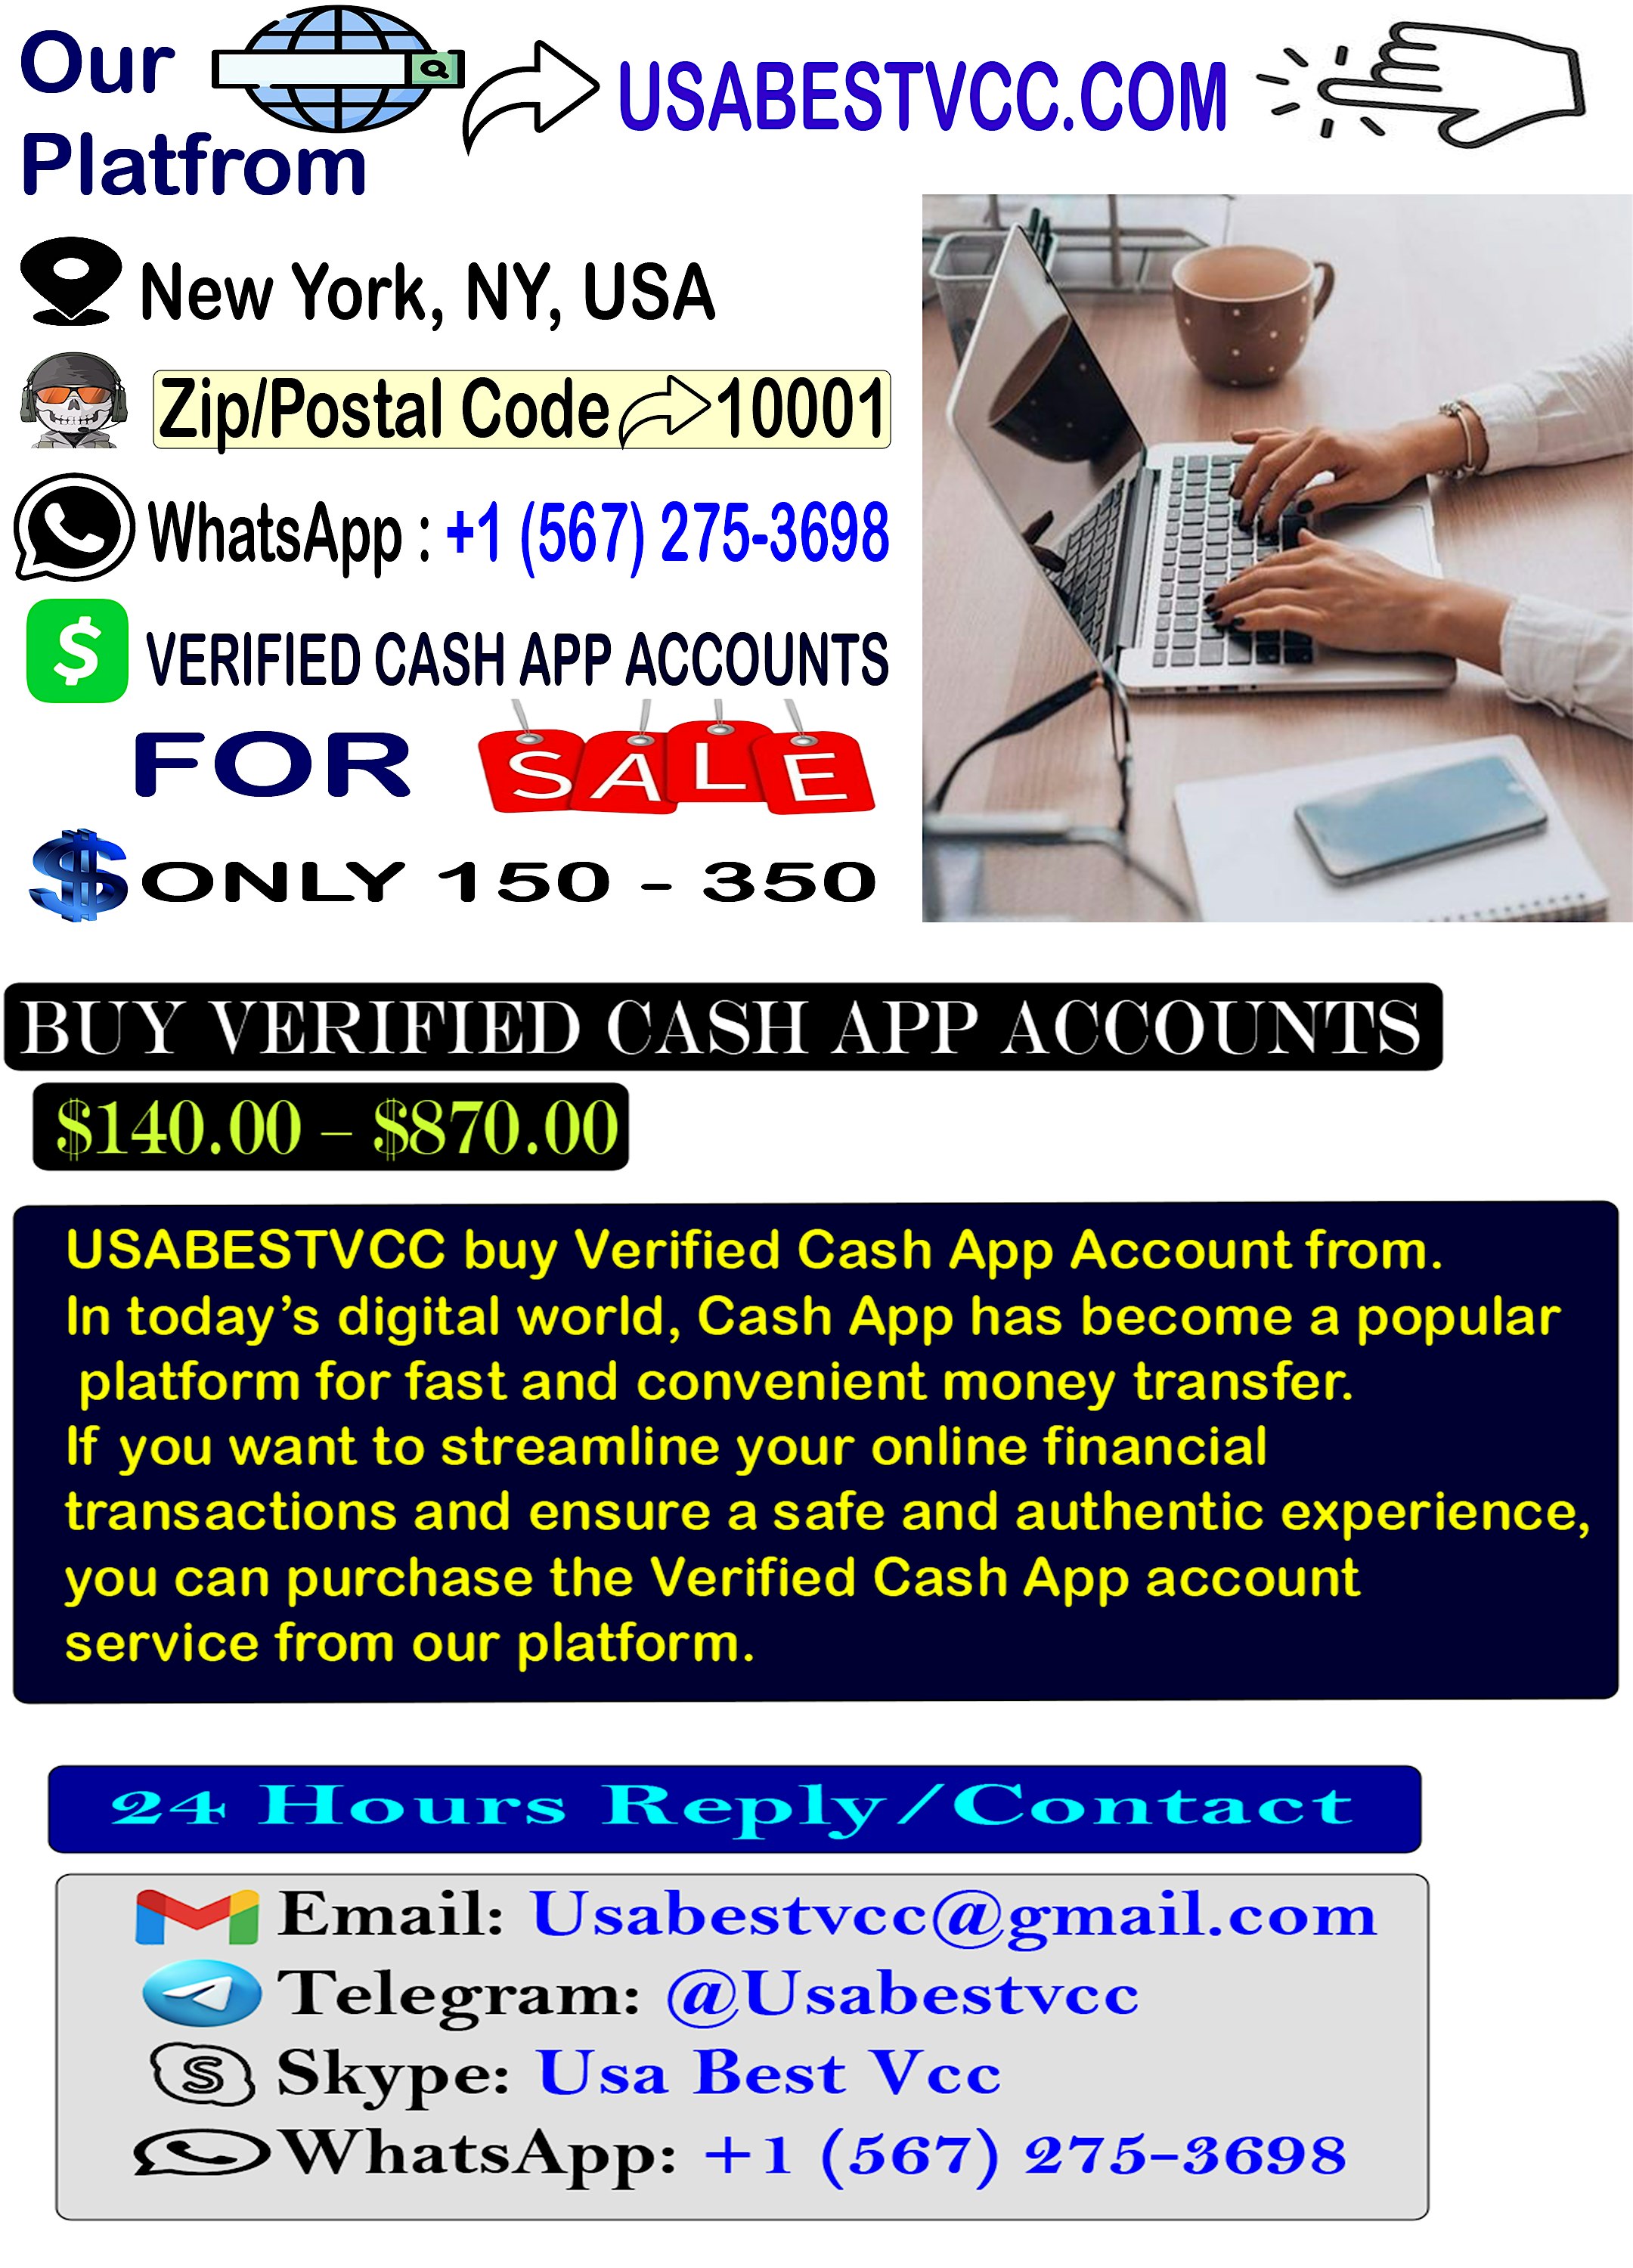 Top 5 Sites to Buy Verified Cash App Accounts Old and new